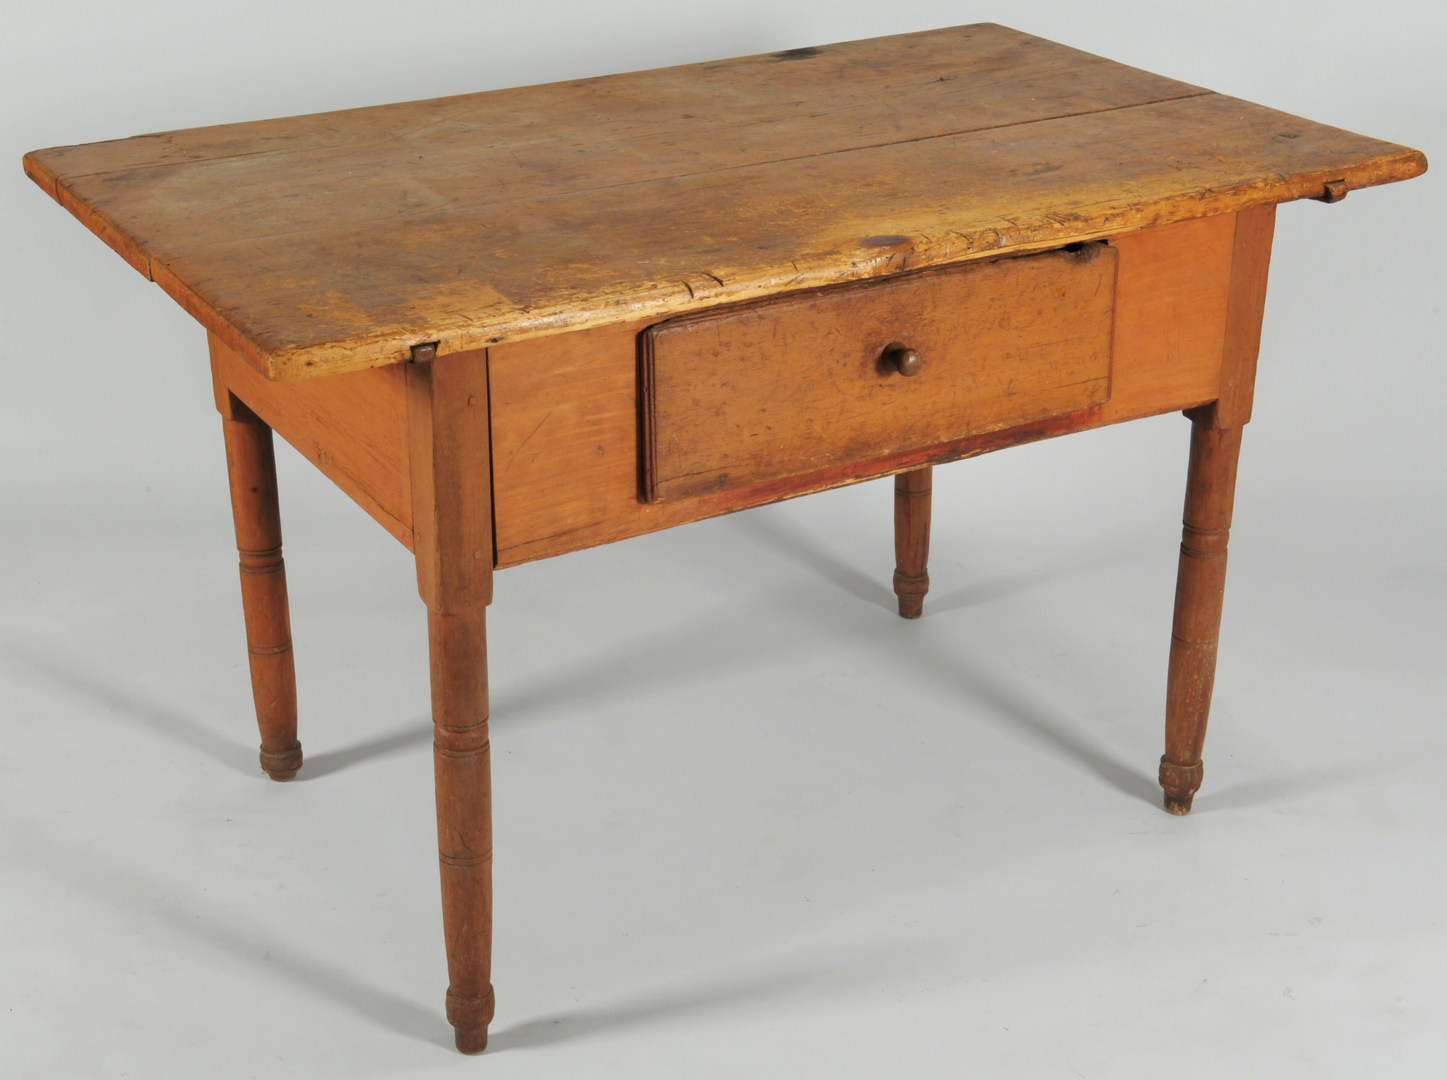 Lot 317: Sheraton work table, possibly Southern